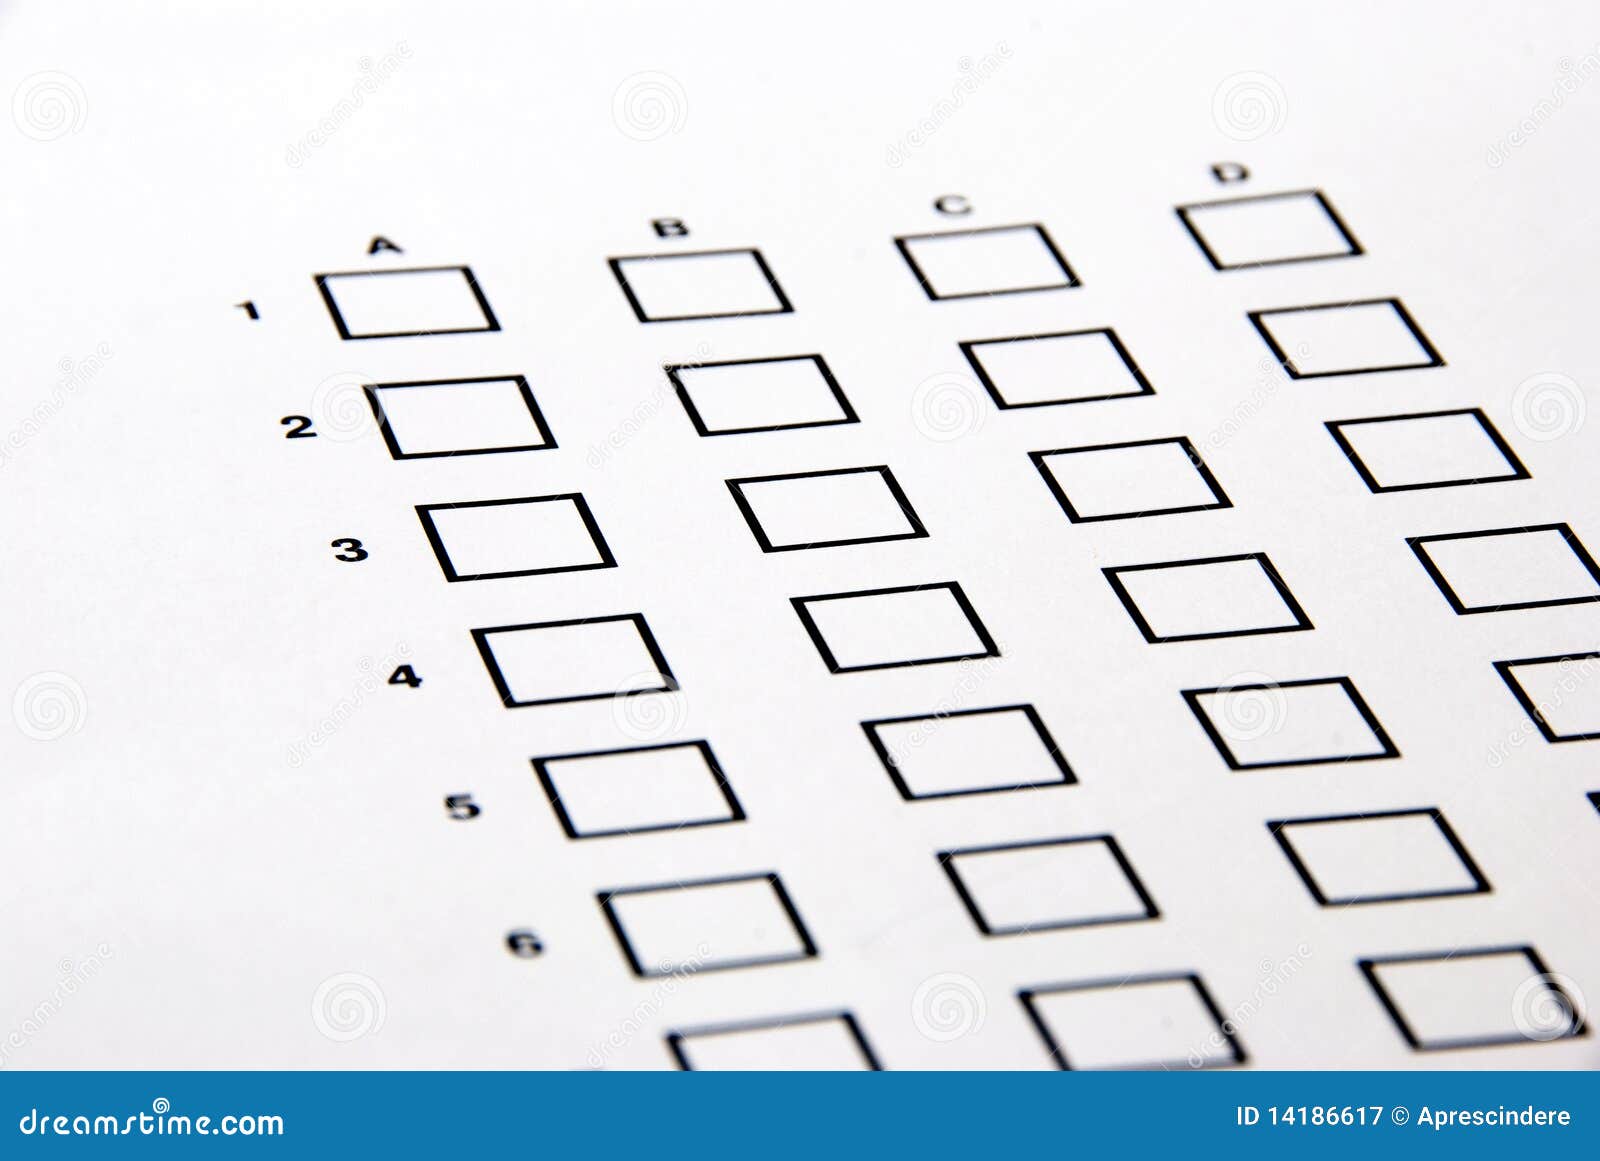 response-sheet-with-yes-no-and-may-be-as-choice-royalty-free-stock-photography-cartoondealer